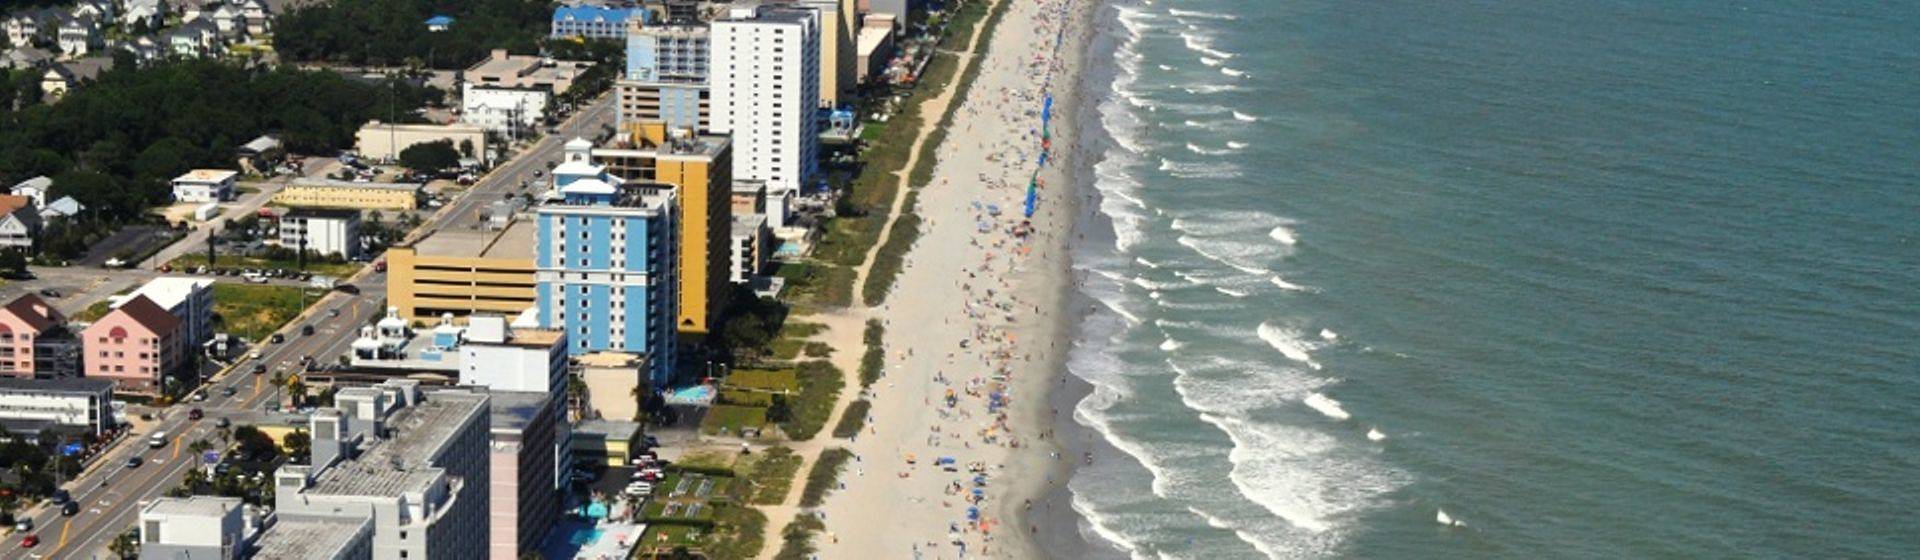 Holidays to Myrtle Beach Image